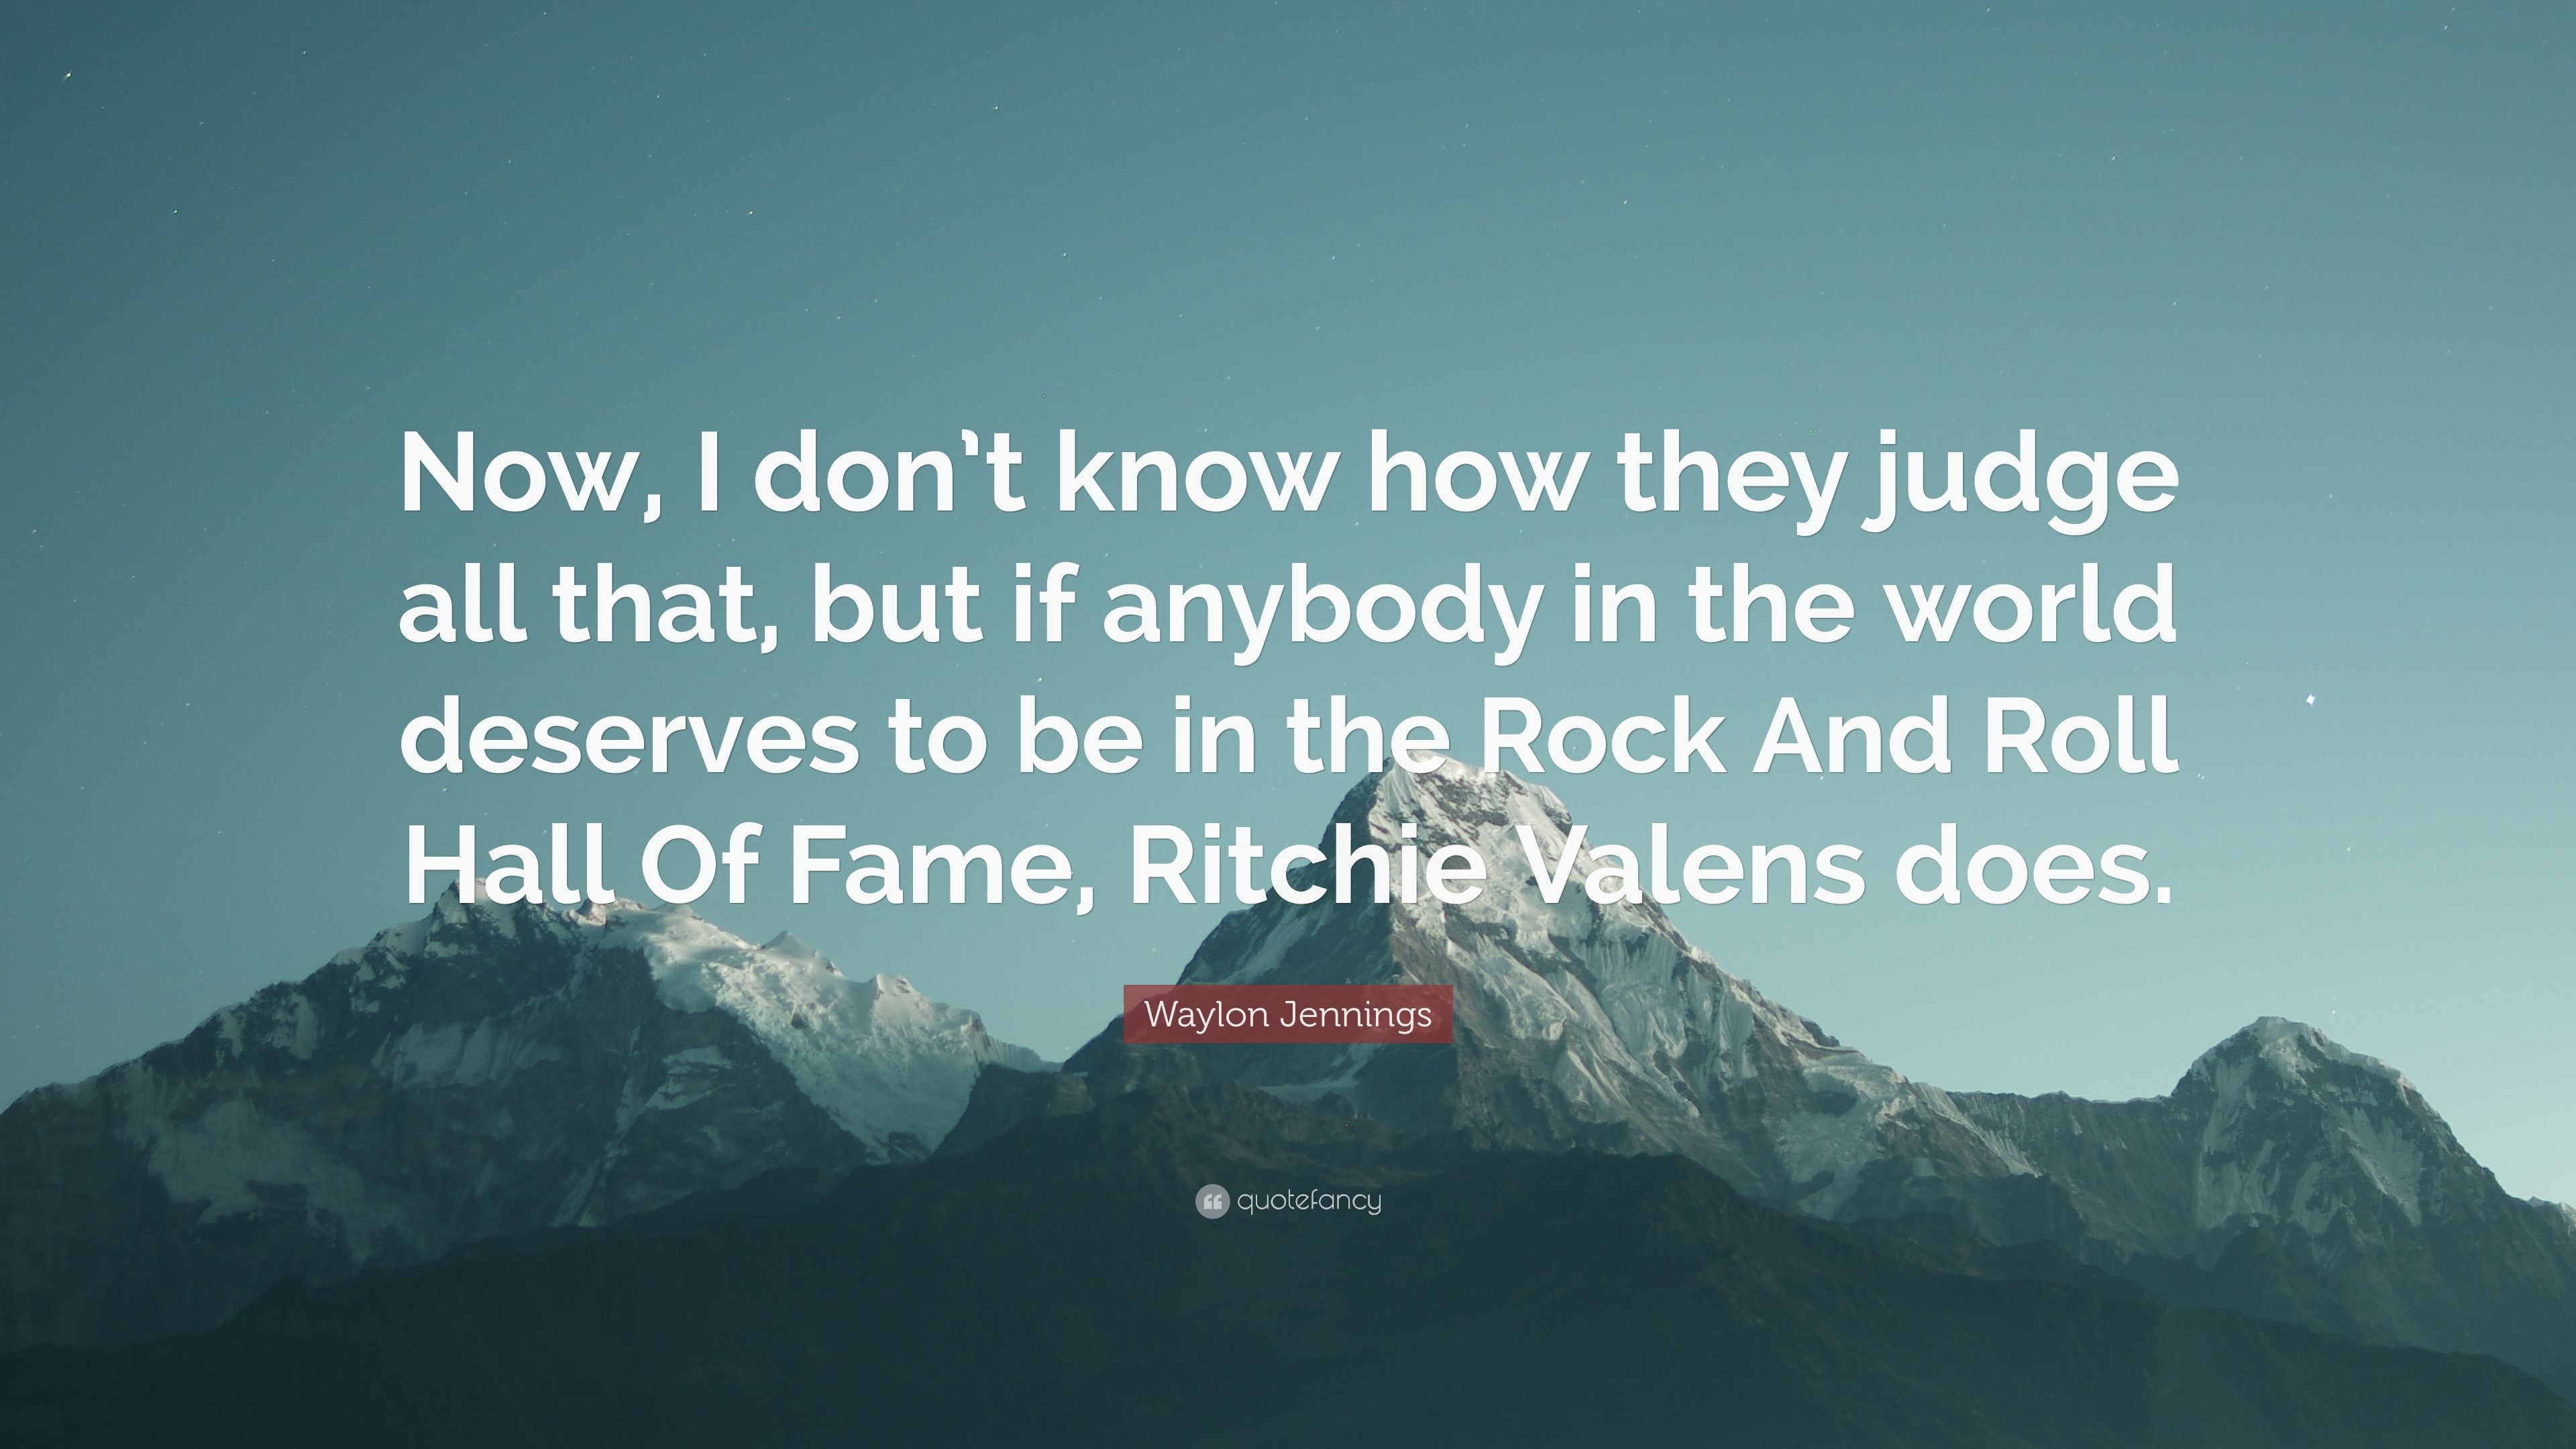 7 Ritchie Valens Quotes About Life